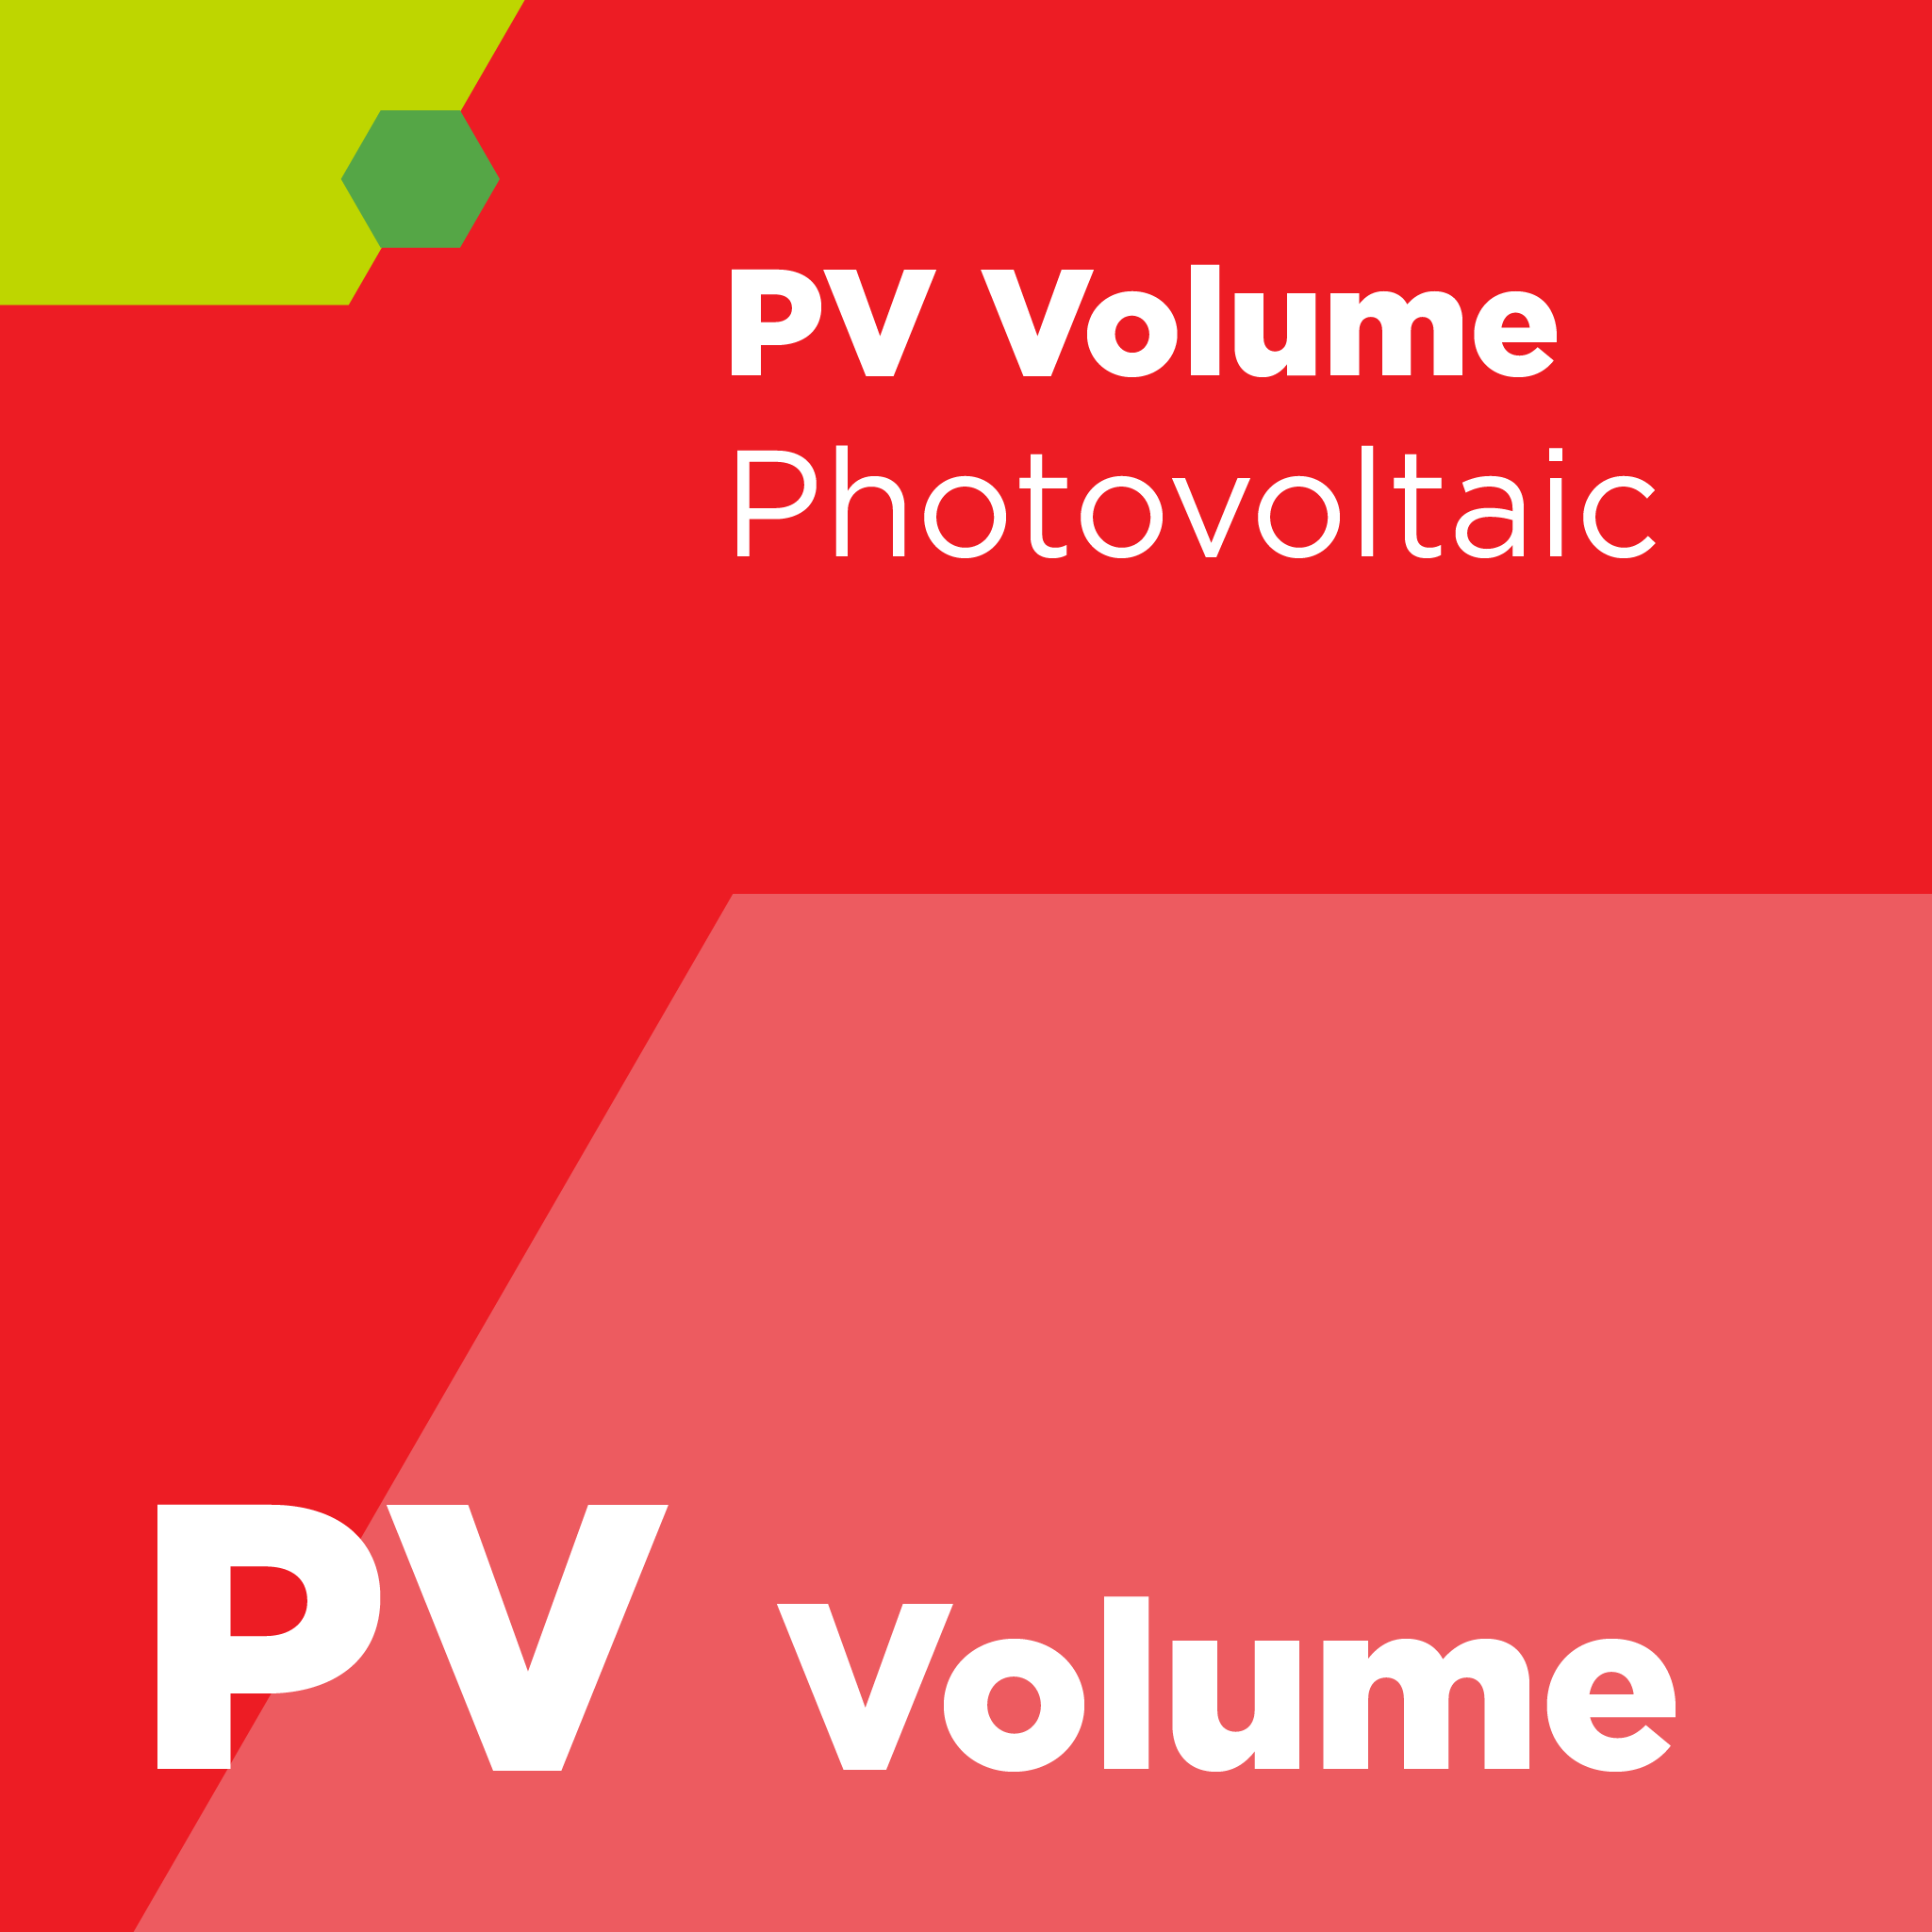 PV09400 - SEMI PV94 - Guide for Identifying Cell Defects In Crystalline Silicon Photovoltaic (PV) Modules By Electroluminescence (EL) Imaging